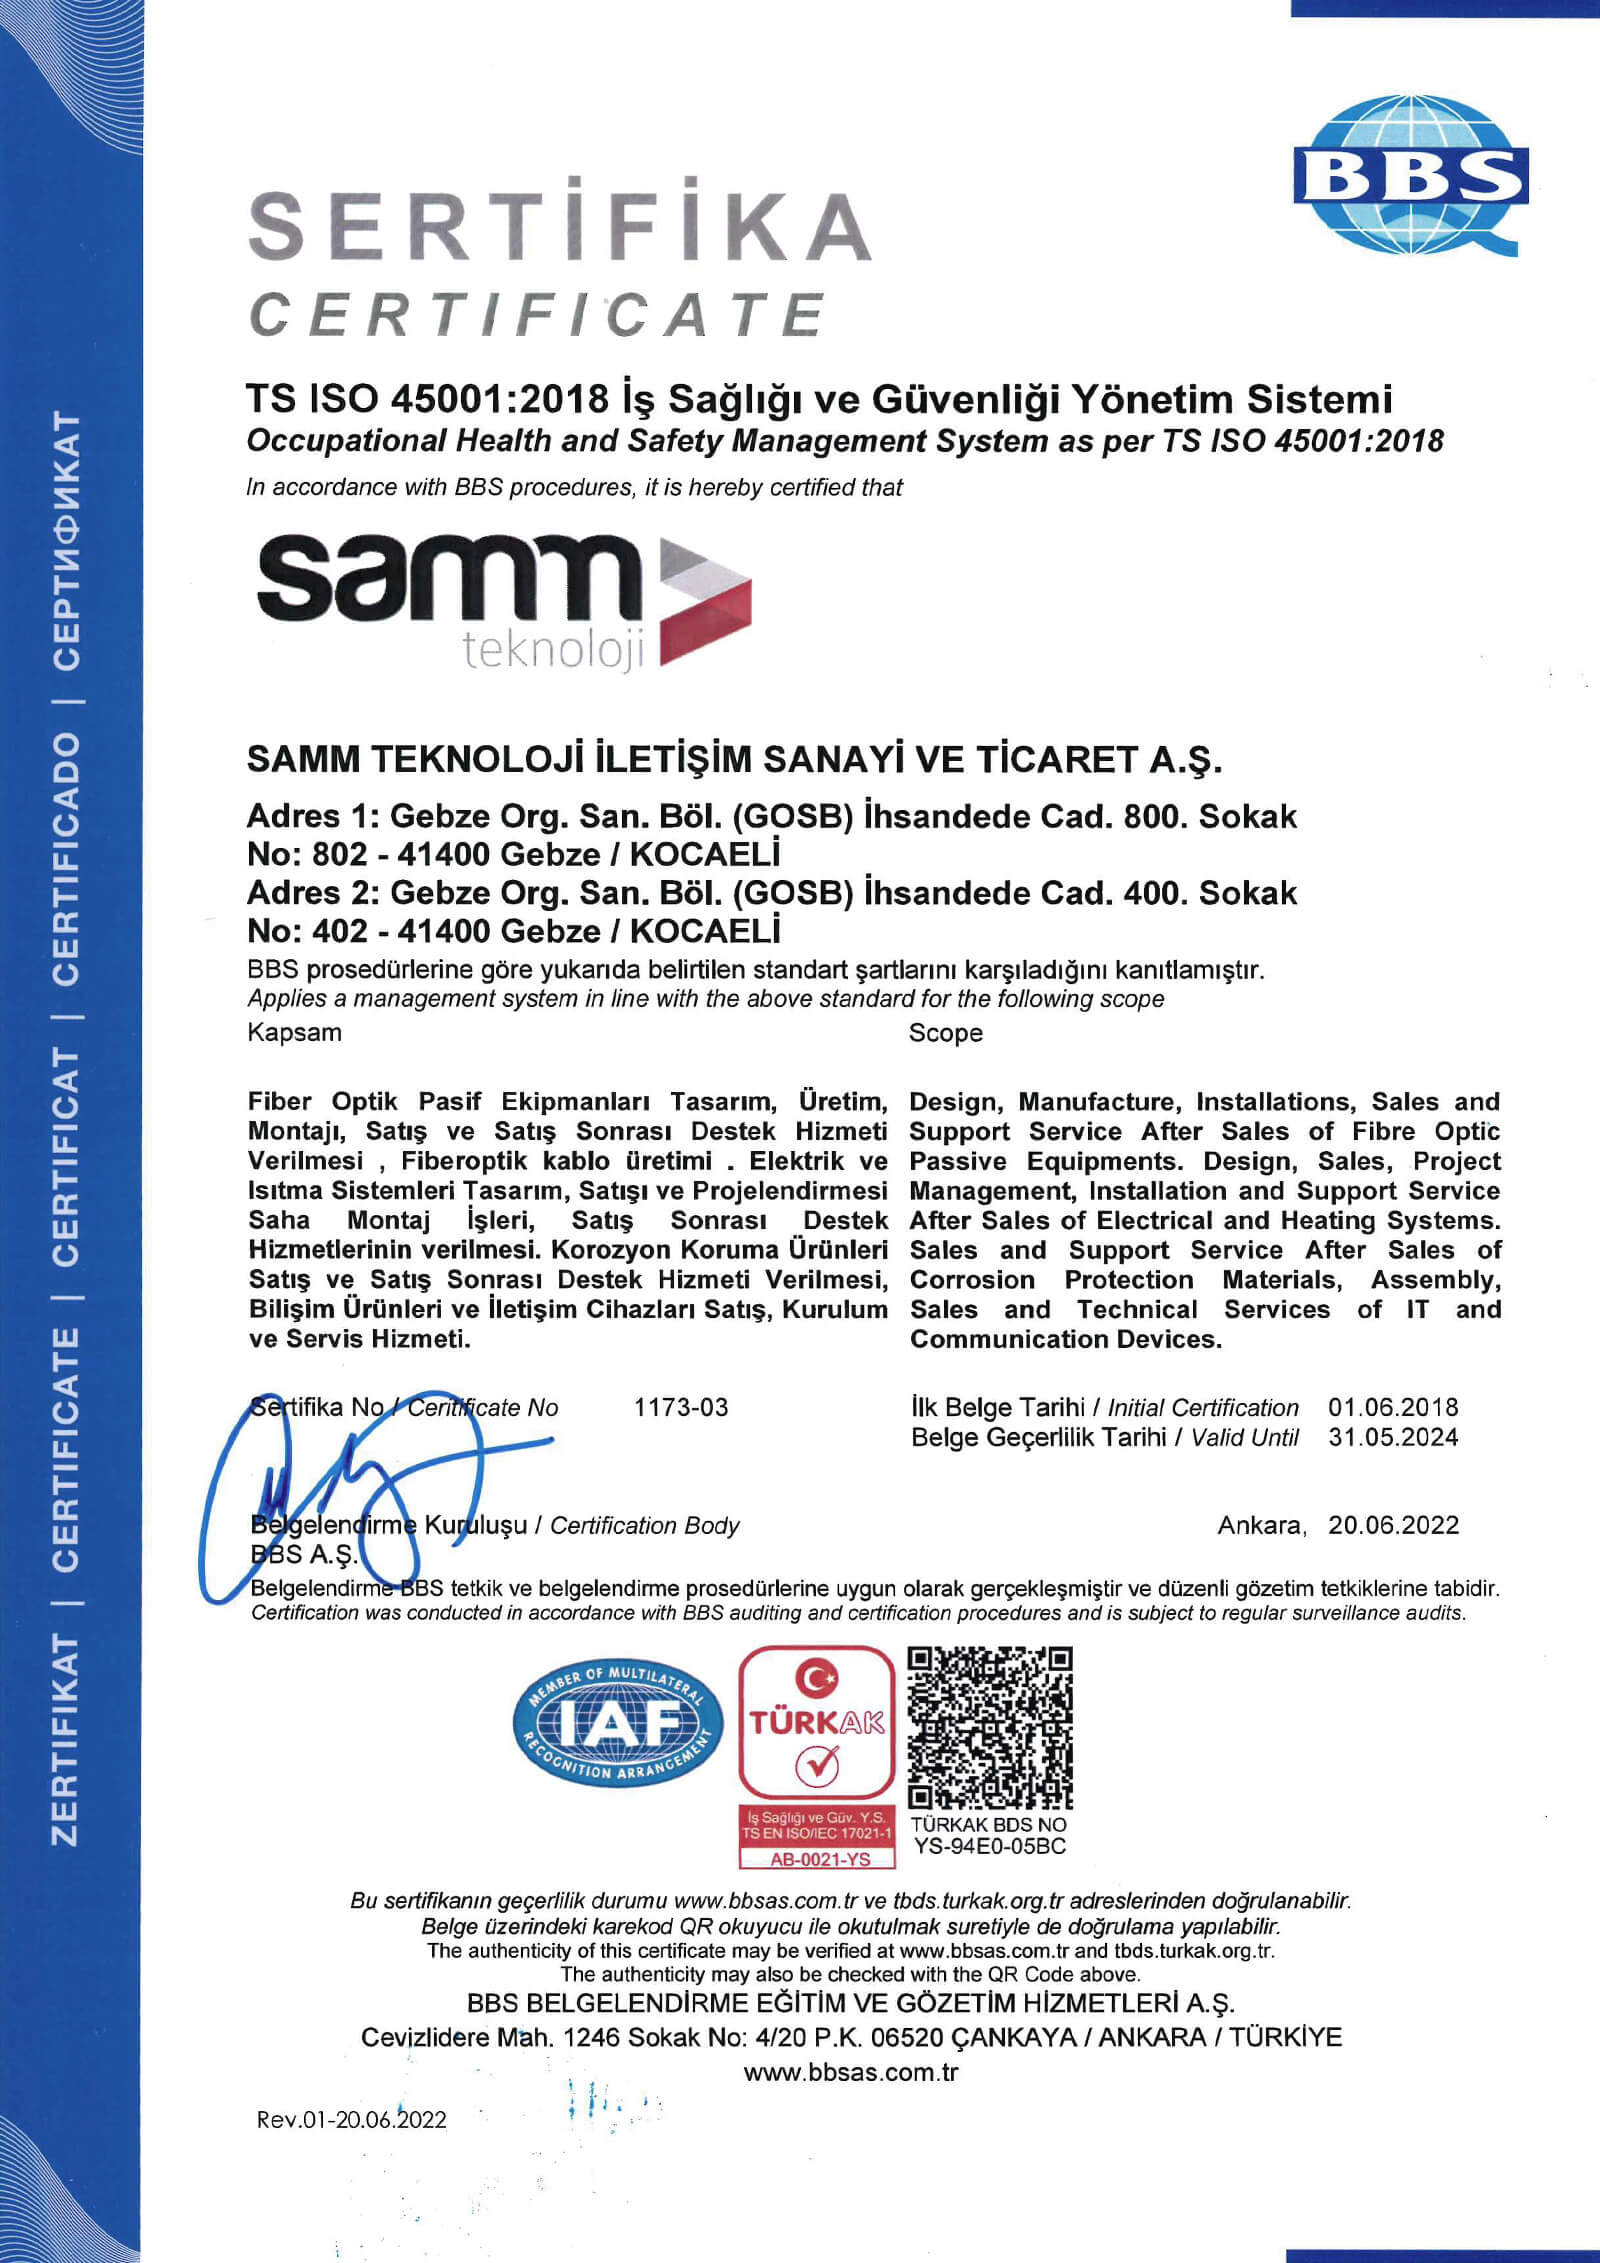 QUALITY MANAGEMENT SYSTEM CERTIFICATE ISO 45001-2018